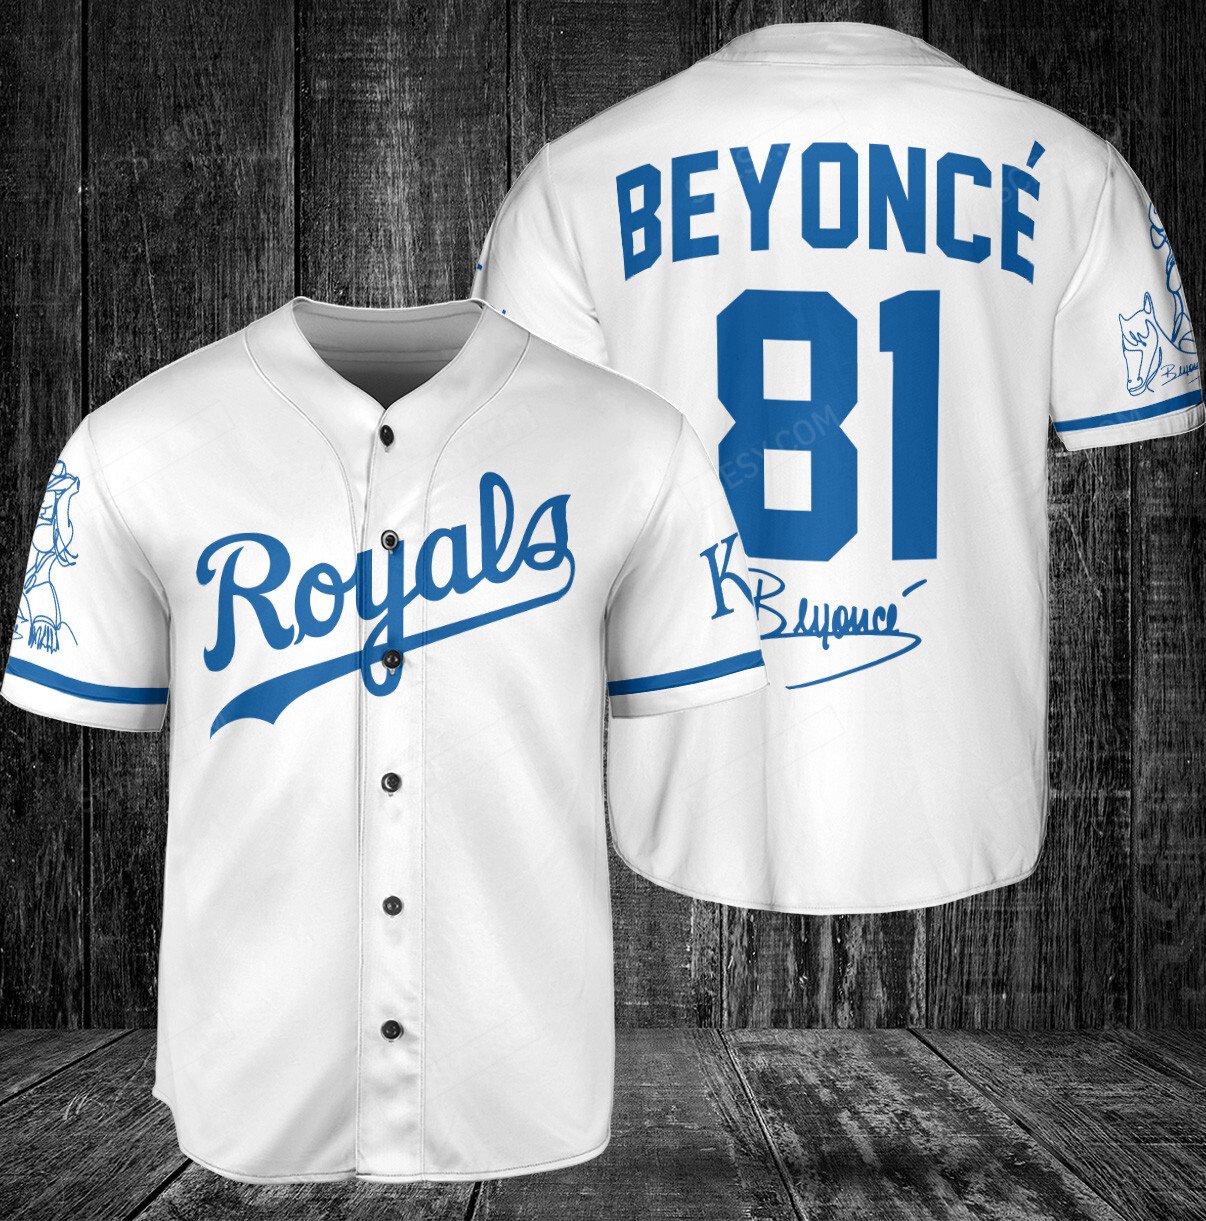 Get Your White Beyonce Royals Baseball Jersey Today - Scesy